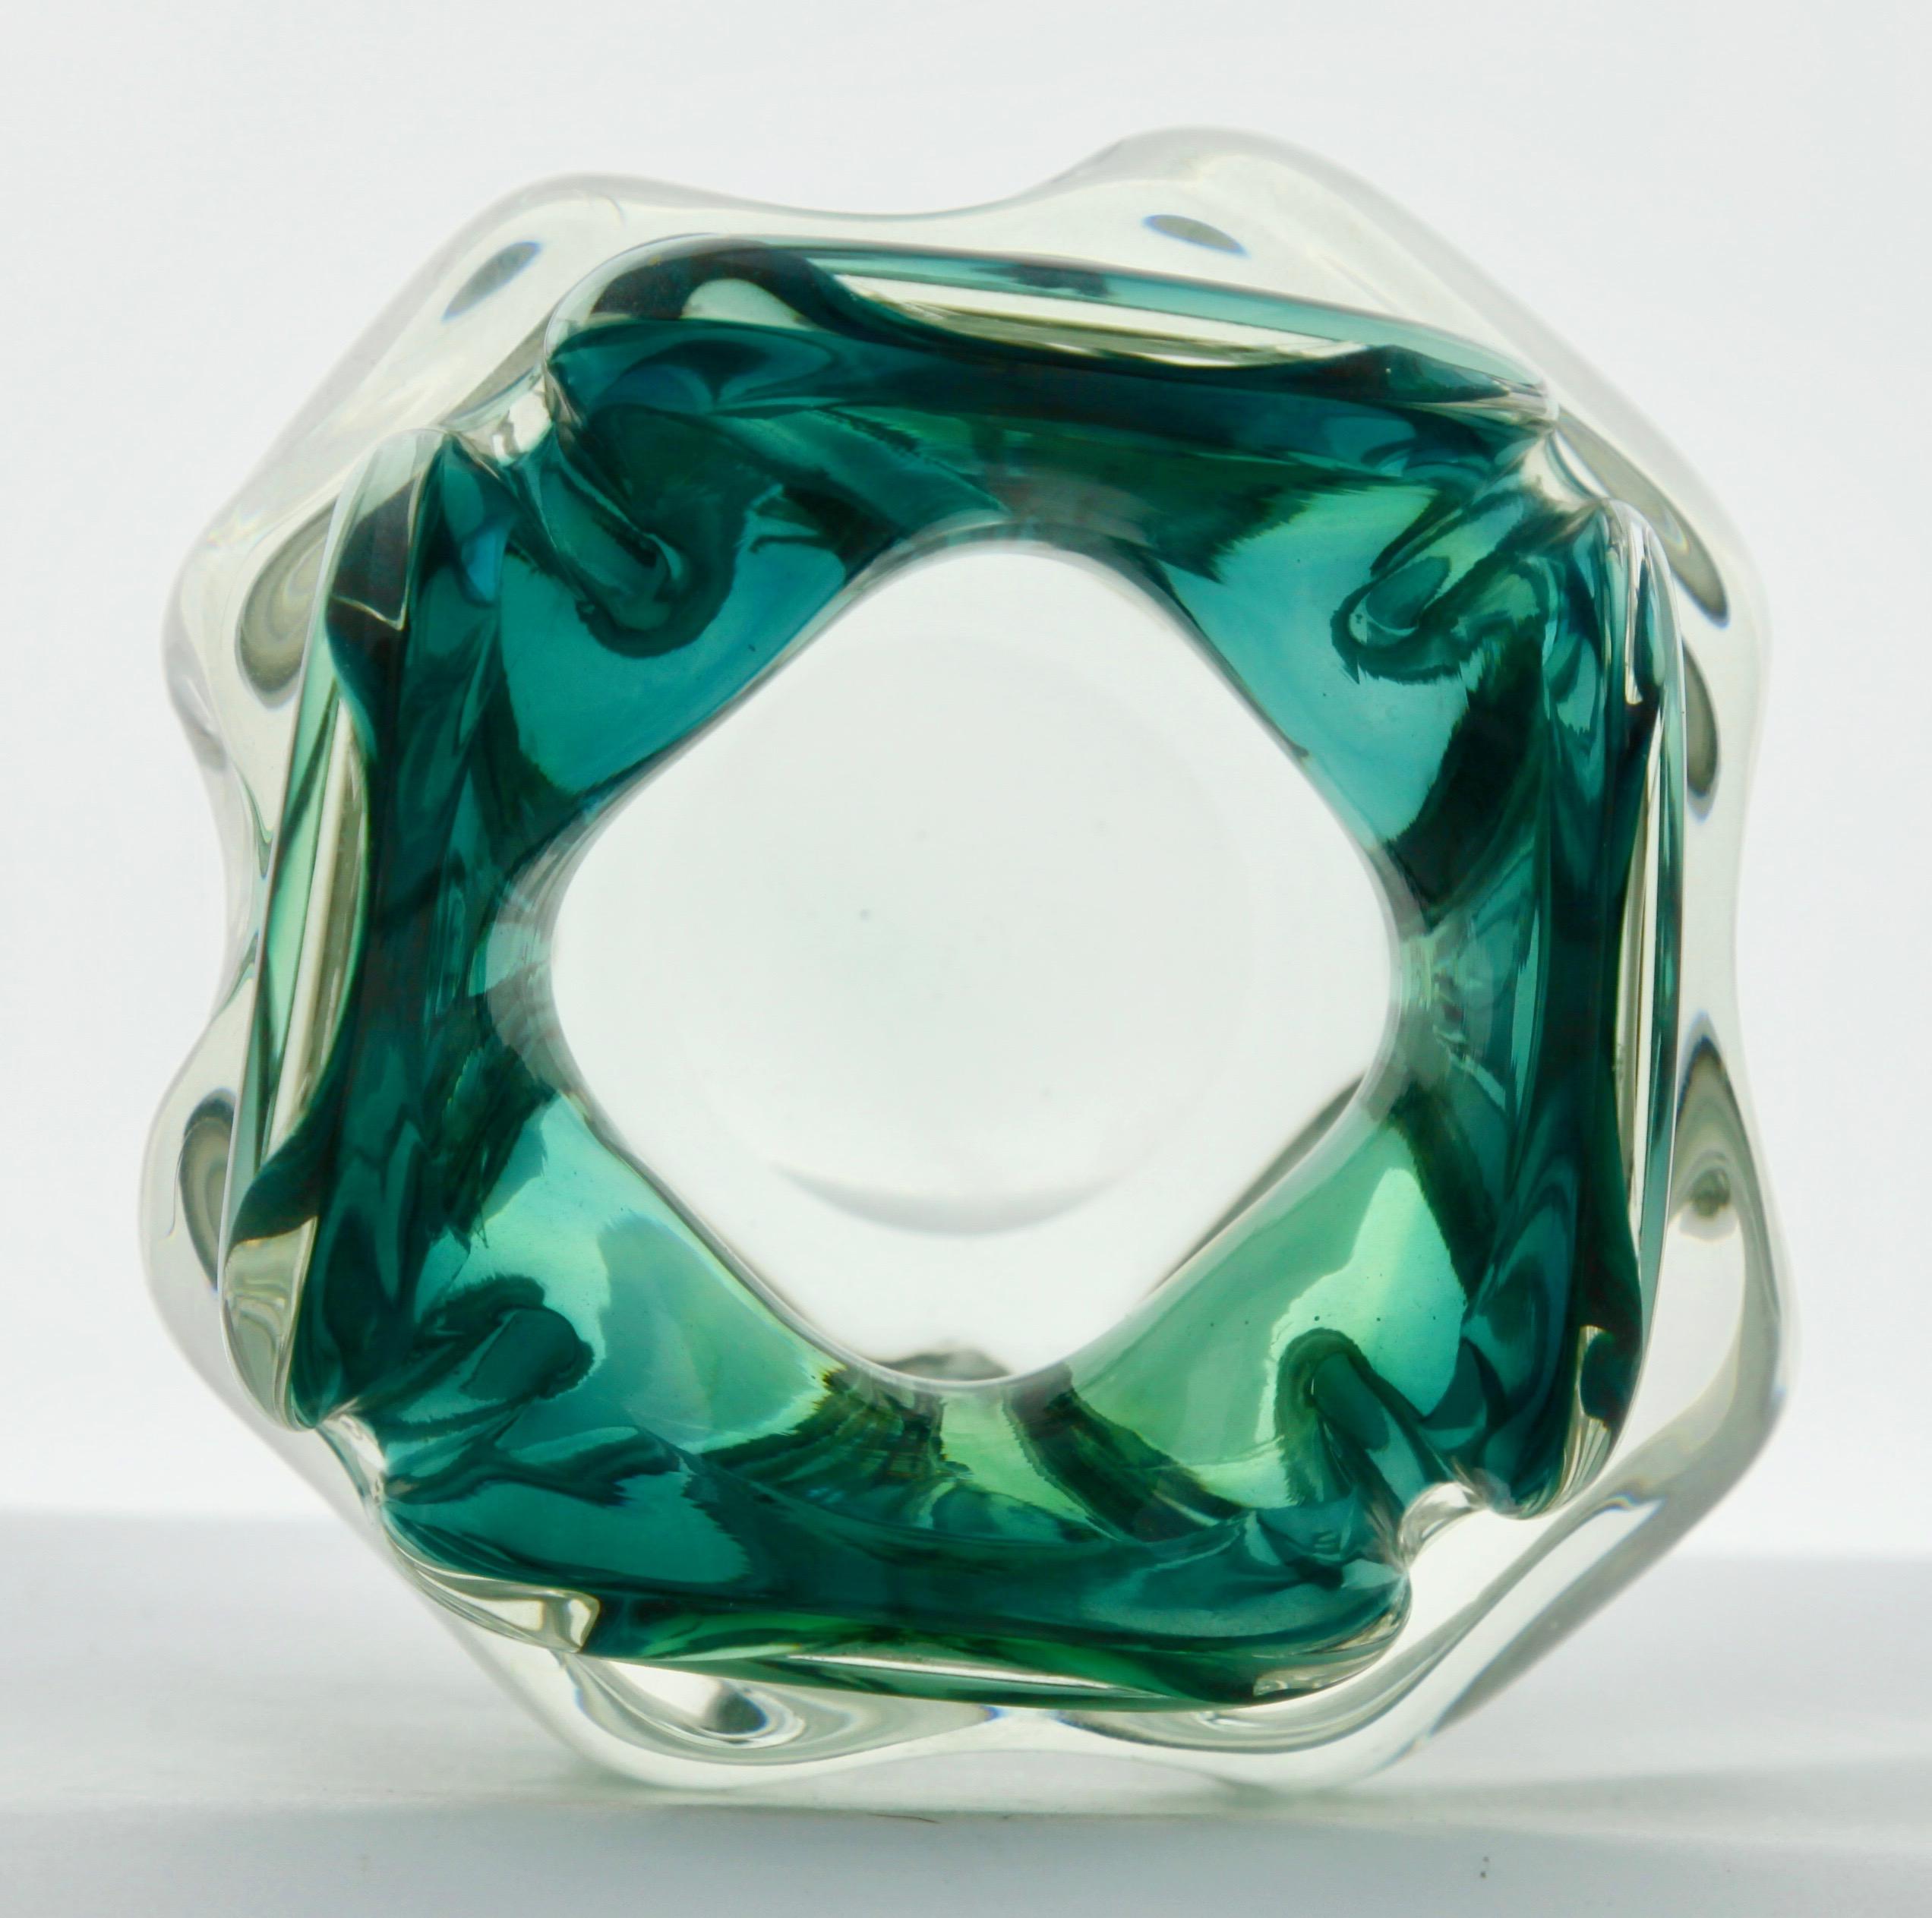 Czech Solid Crystal Biomorphic Bowl with Waves of Green and Sommerso